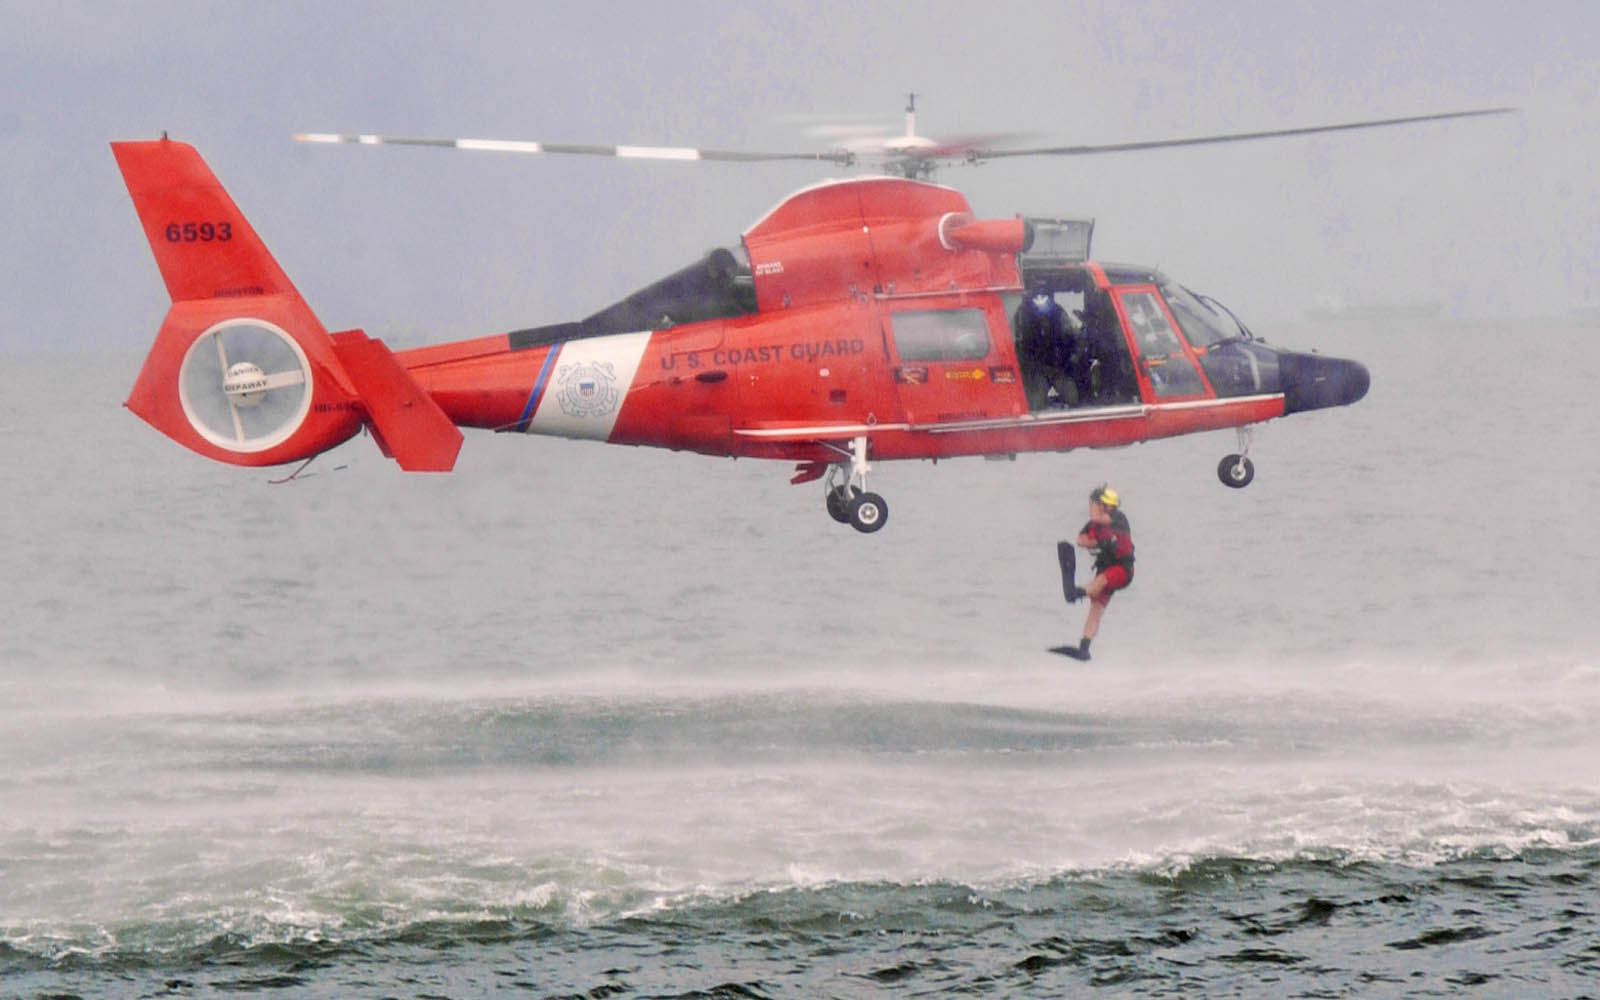 Hh Dolphin Us Coast Guard Helicopter Wallpaper Desktop